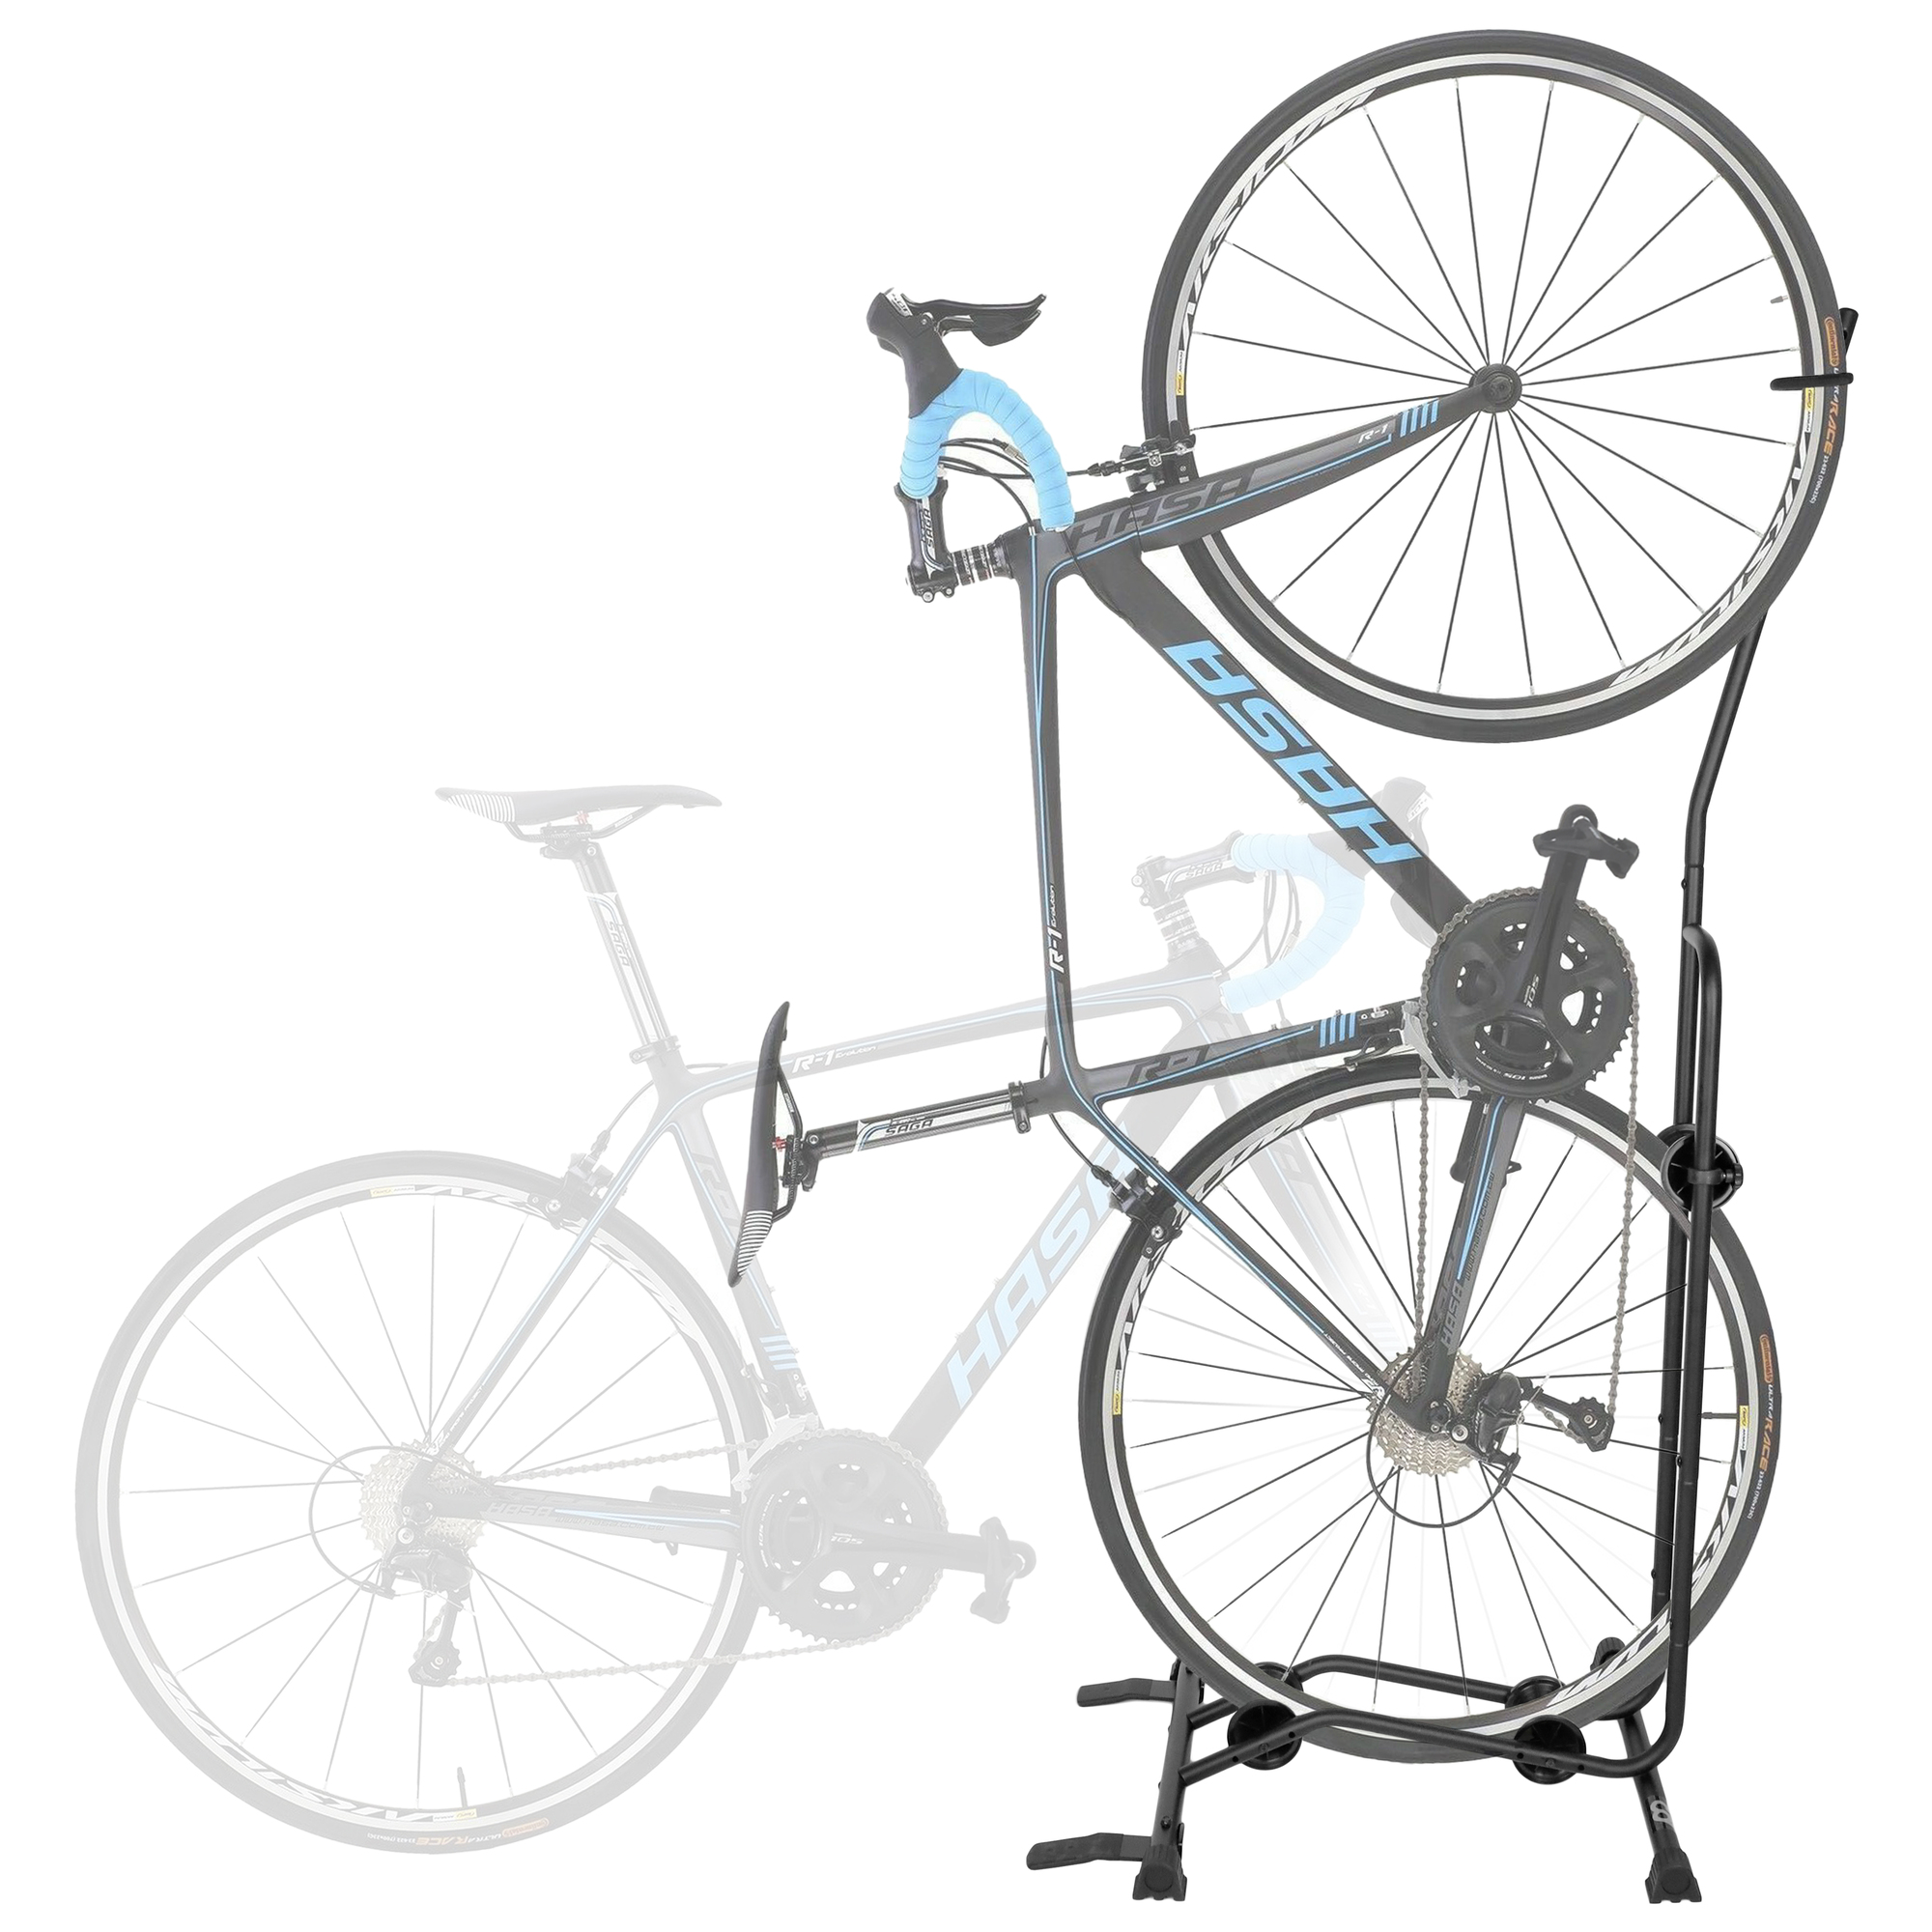 CD Upright Bike Stand - Vertical & Horizontal Bicycle Floor Parking Rack - Safe & Secure - Store MTB Road Bikes in Garage or Home